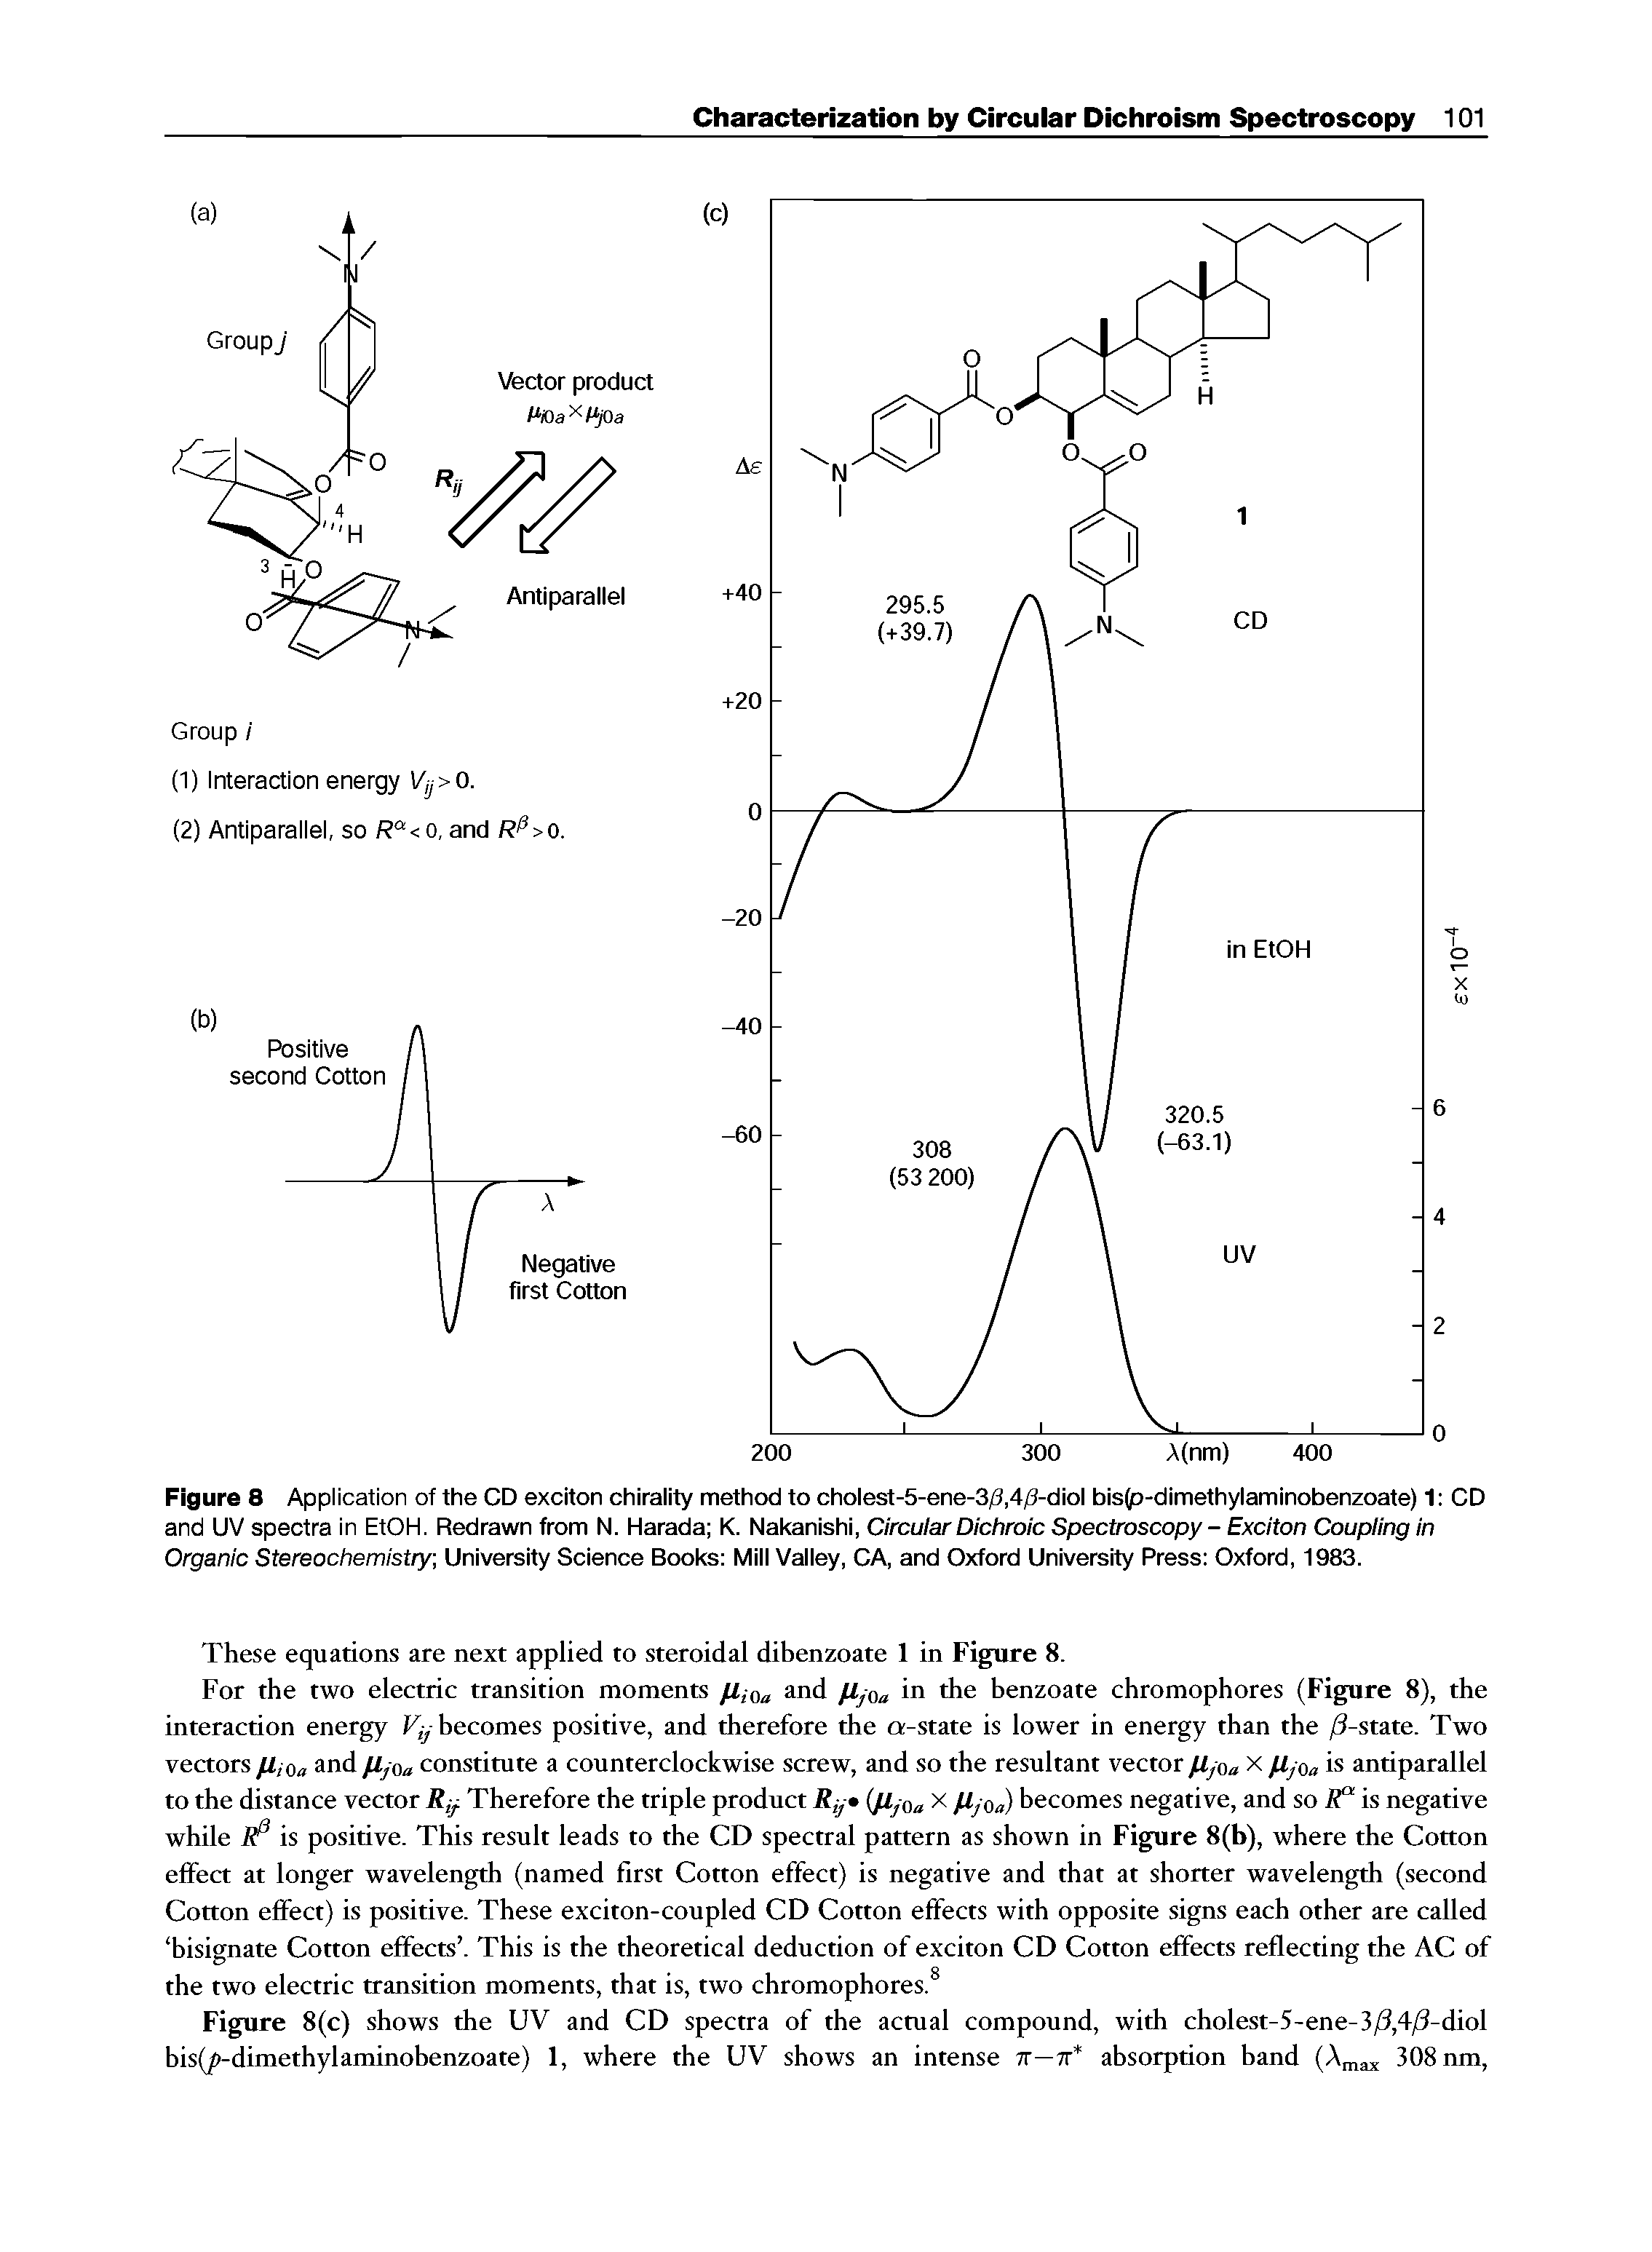 Figure 8 Application of the CD exciton chirality method to cholest-5-ene-3/3,4/3-diol bis(p-dimethylaminobenzoate) 1 CD and UV spectra in EtOH. Redrawn from N. Harada K. Nakanishi, Circular Dichroic Spectroscopy - Exciton Coupling in Organic Stereochemistry, University Science Books Mill Valley, CA, and Oxford University Press Oxford, 1983.